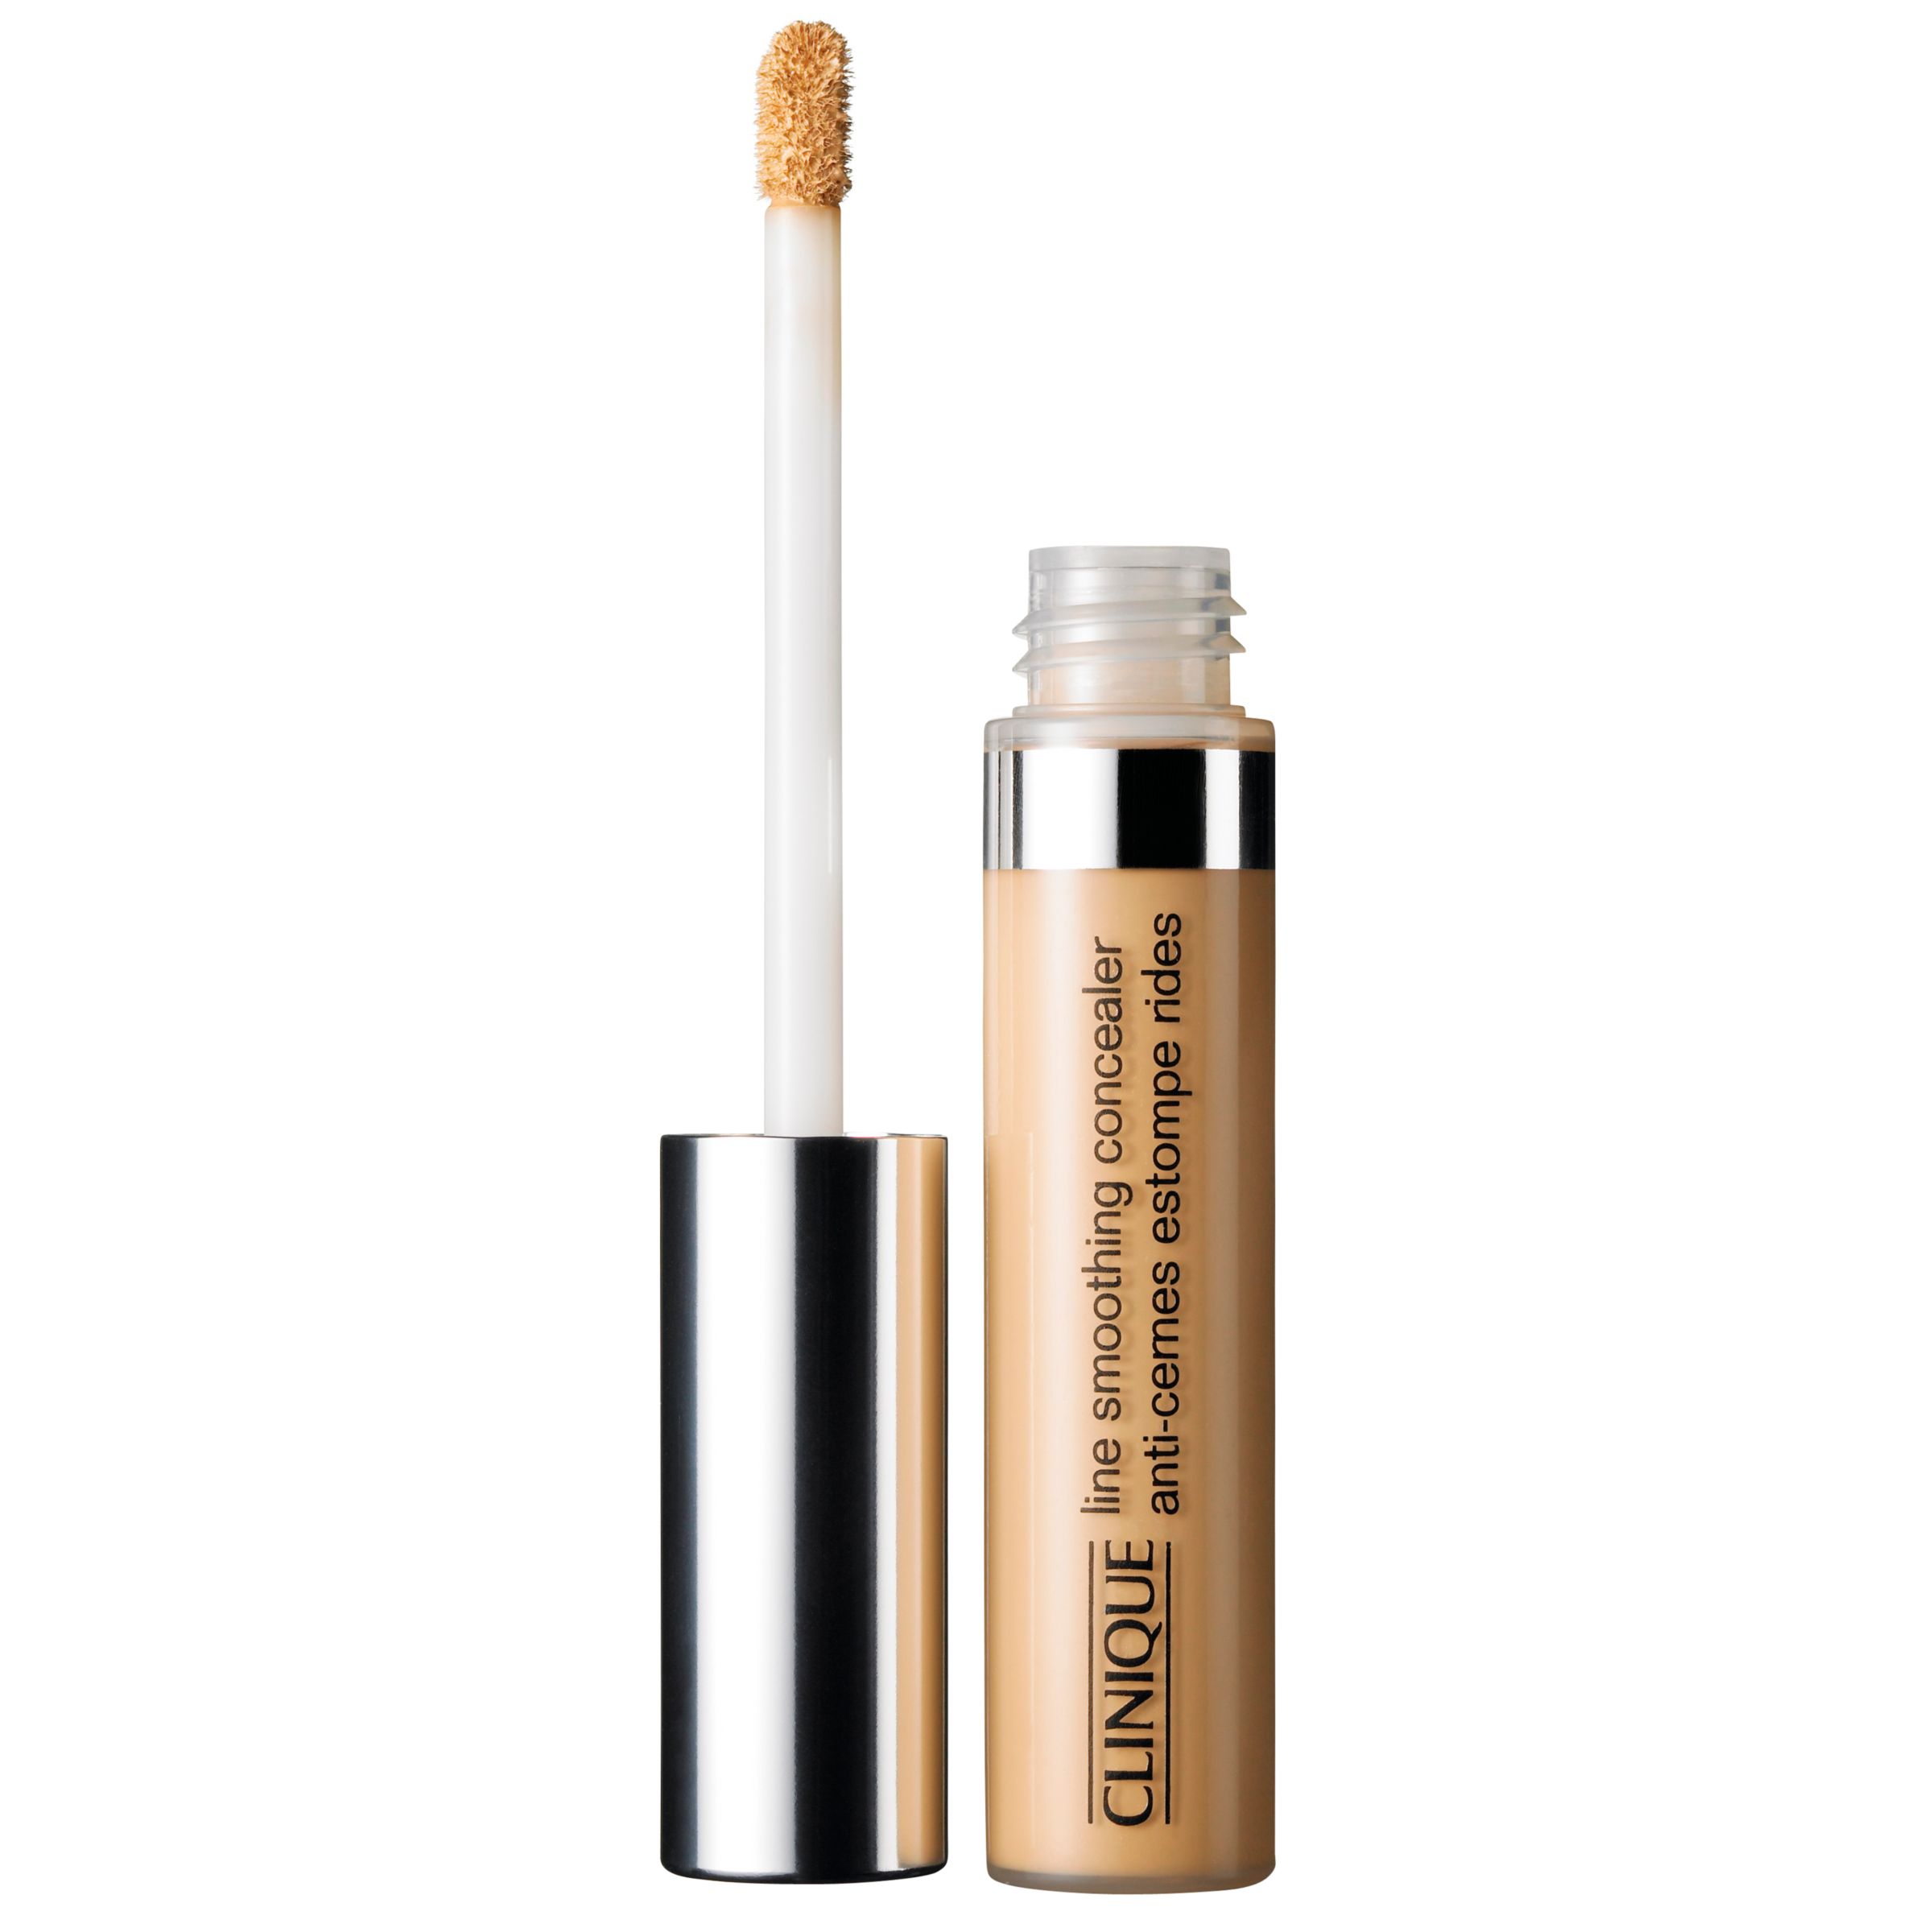 Clinique Line Smoothing Concealer - All Skin Types